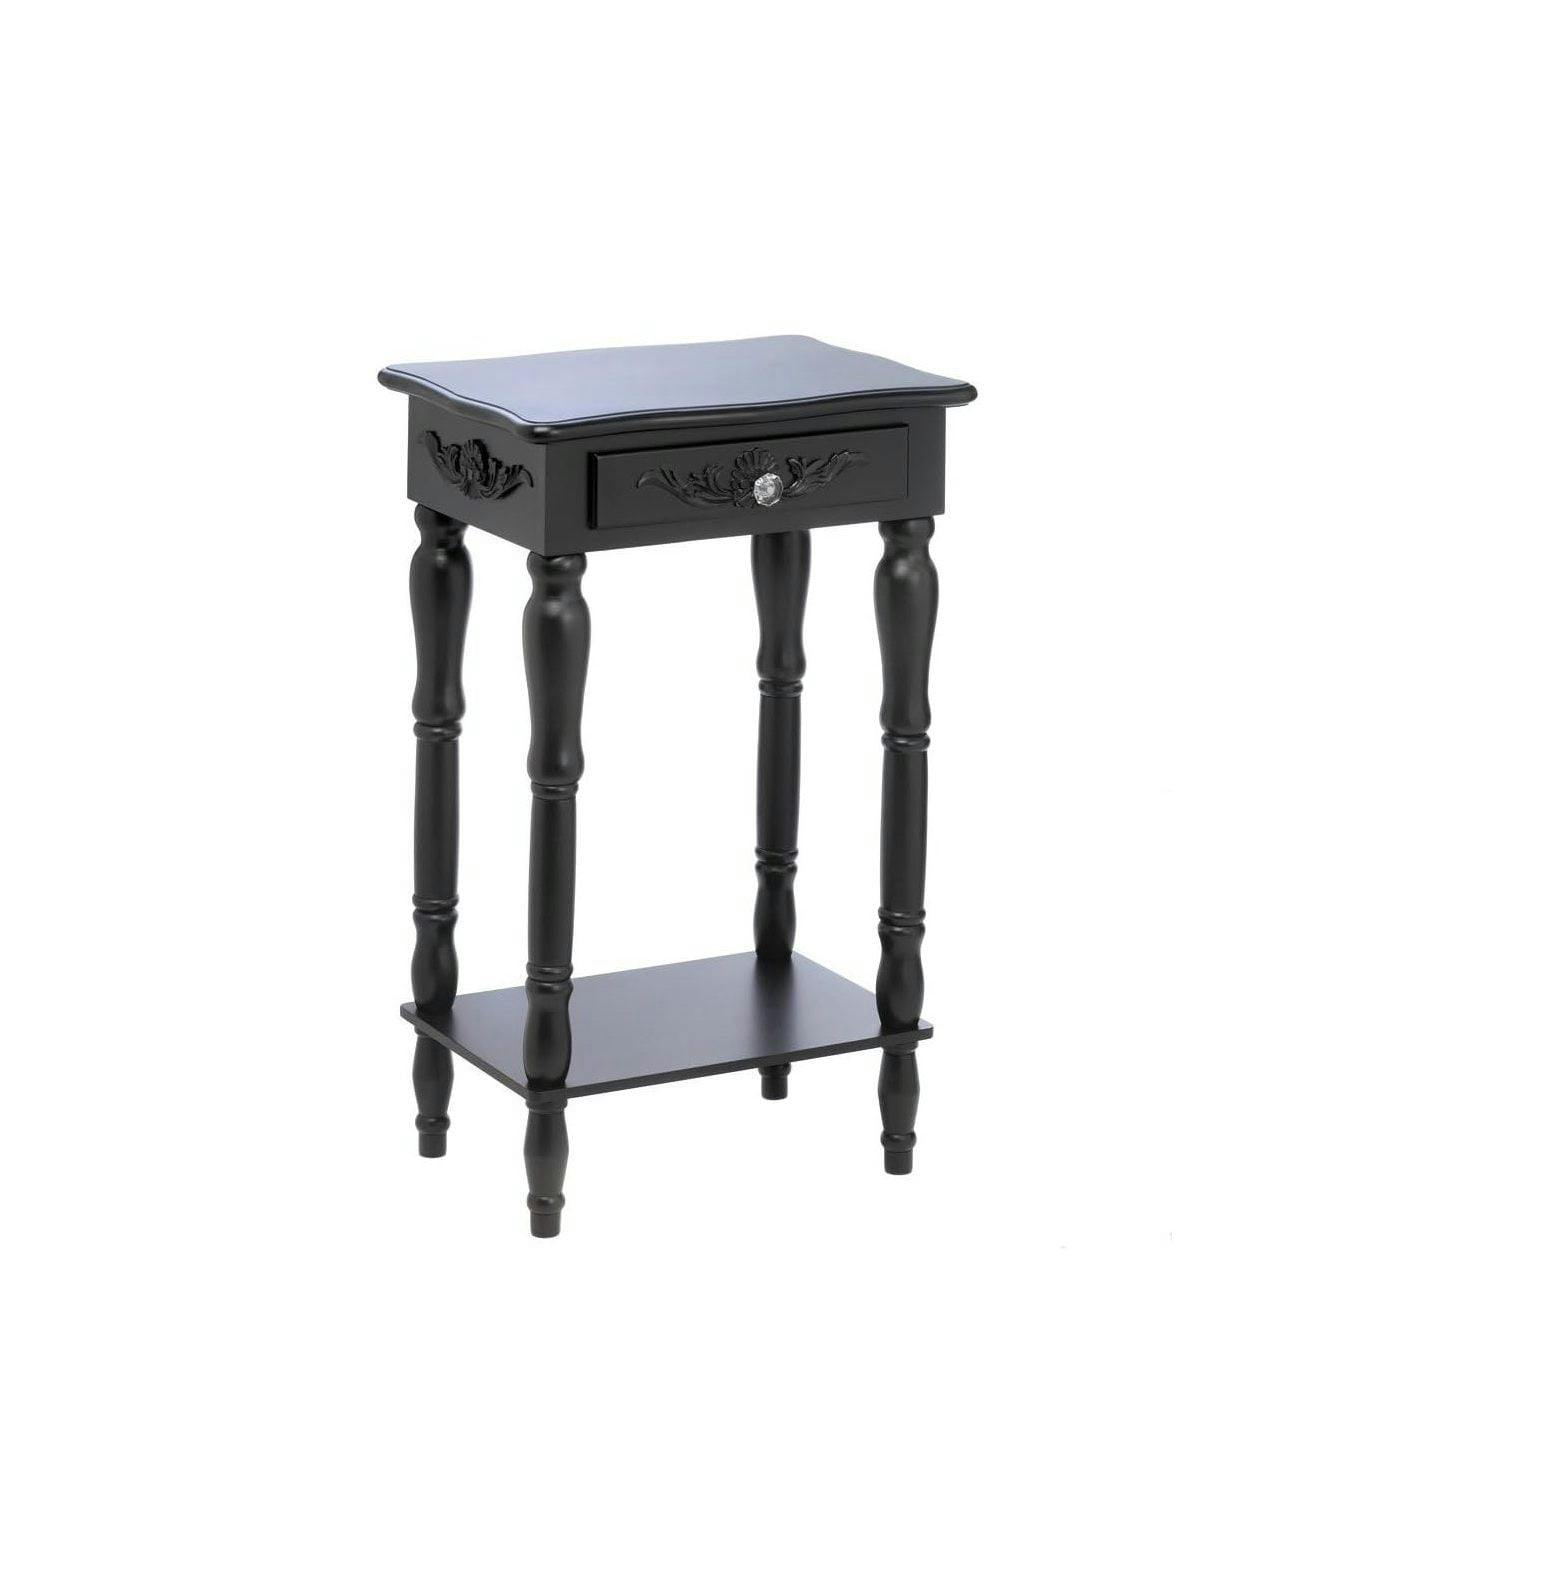 Curvy Carved Black Wood Side Table with Storage